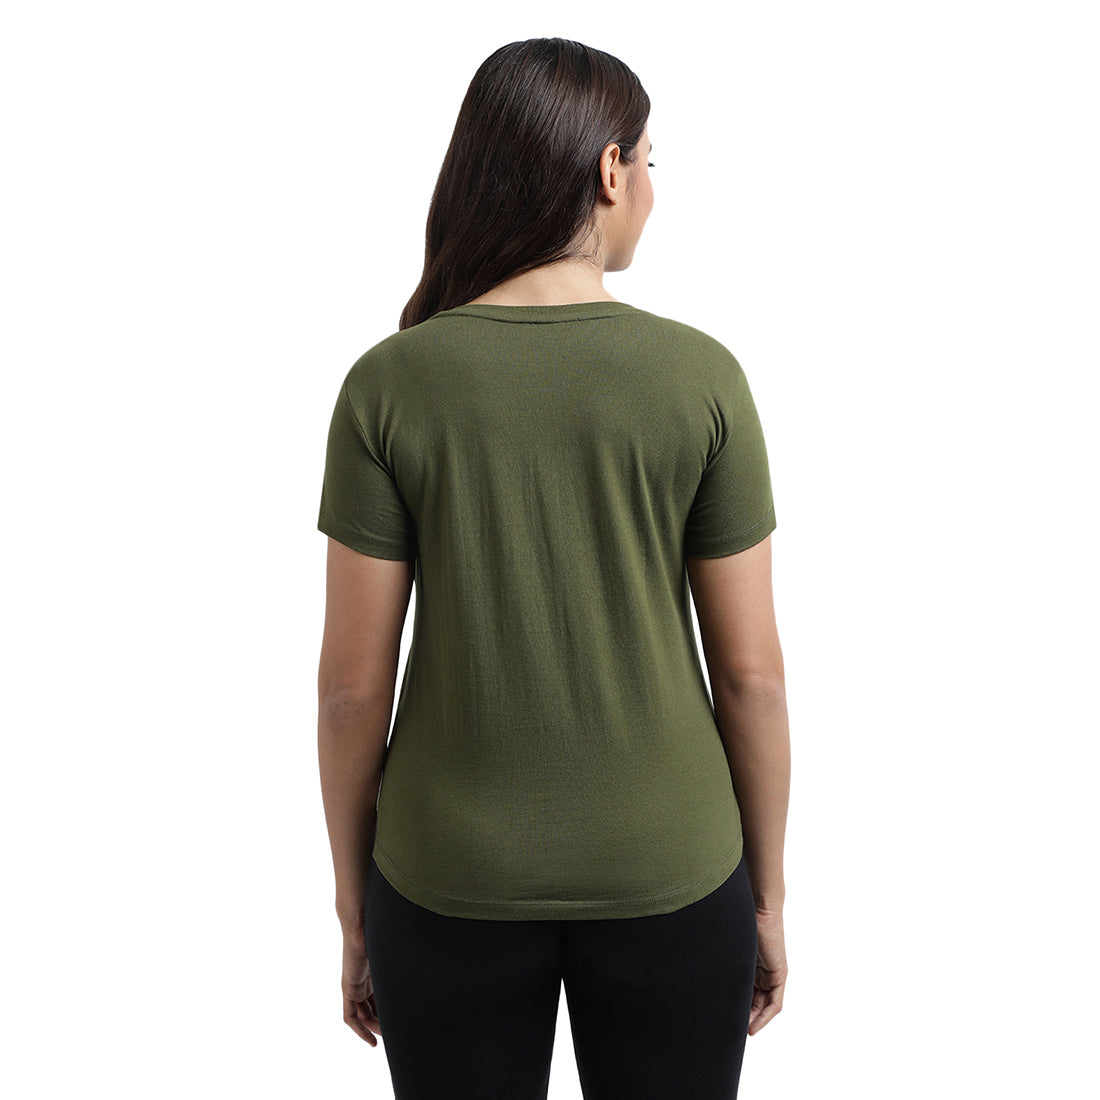 Cotton Workout Tee - Green - Back Image